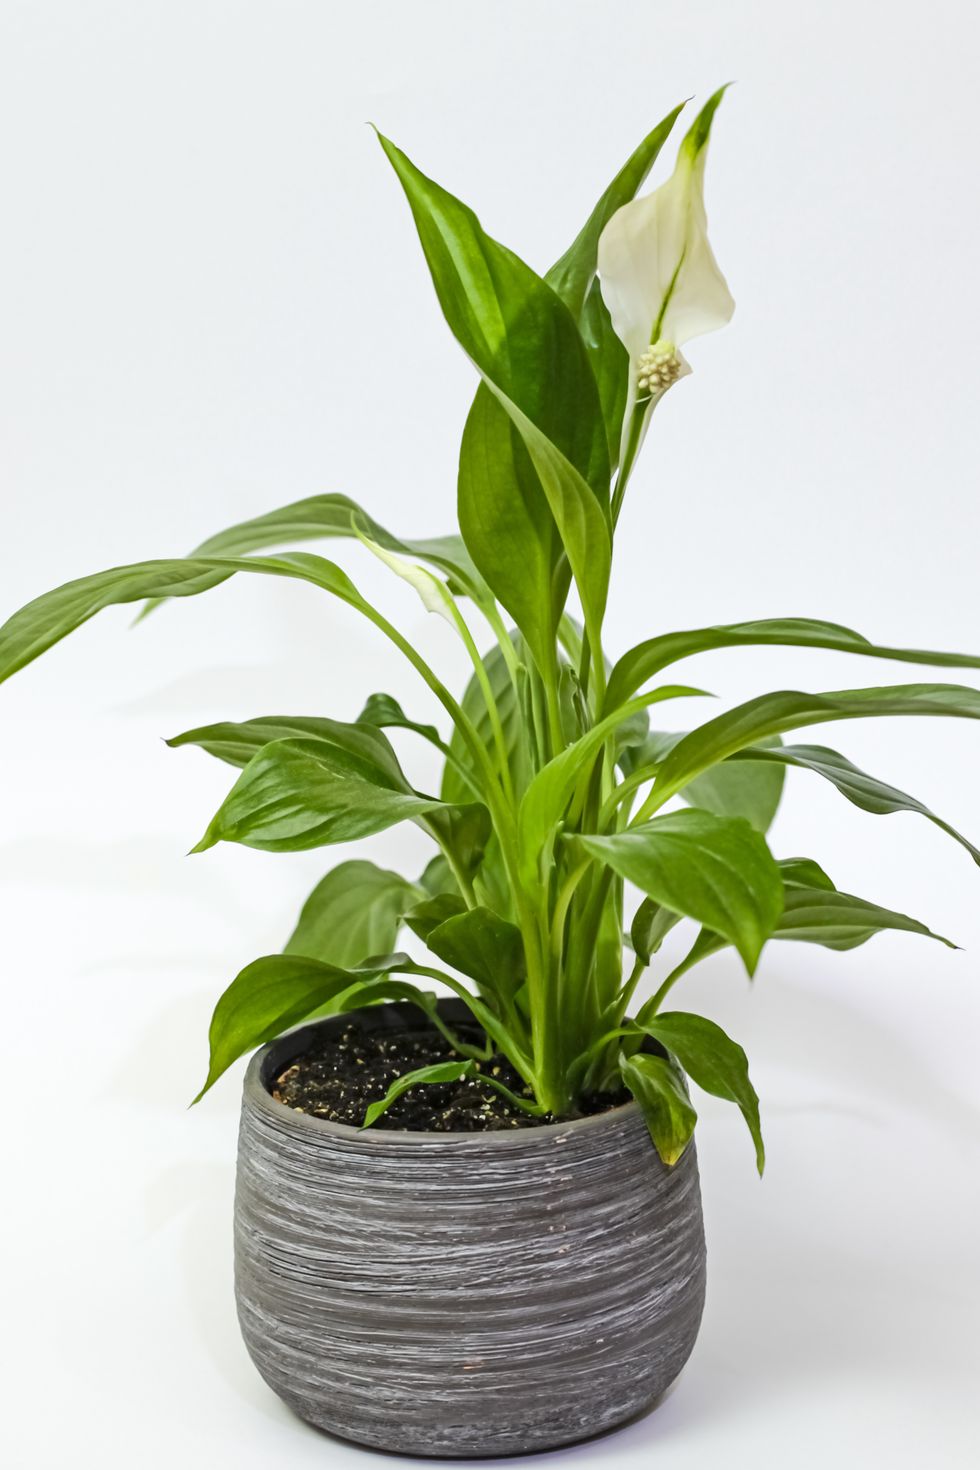 spathiphyllum commonly known as peace lily